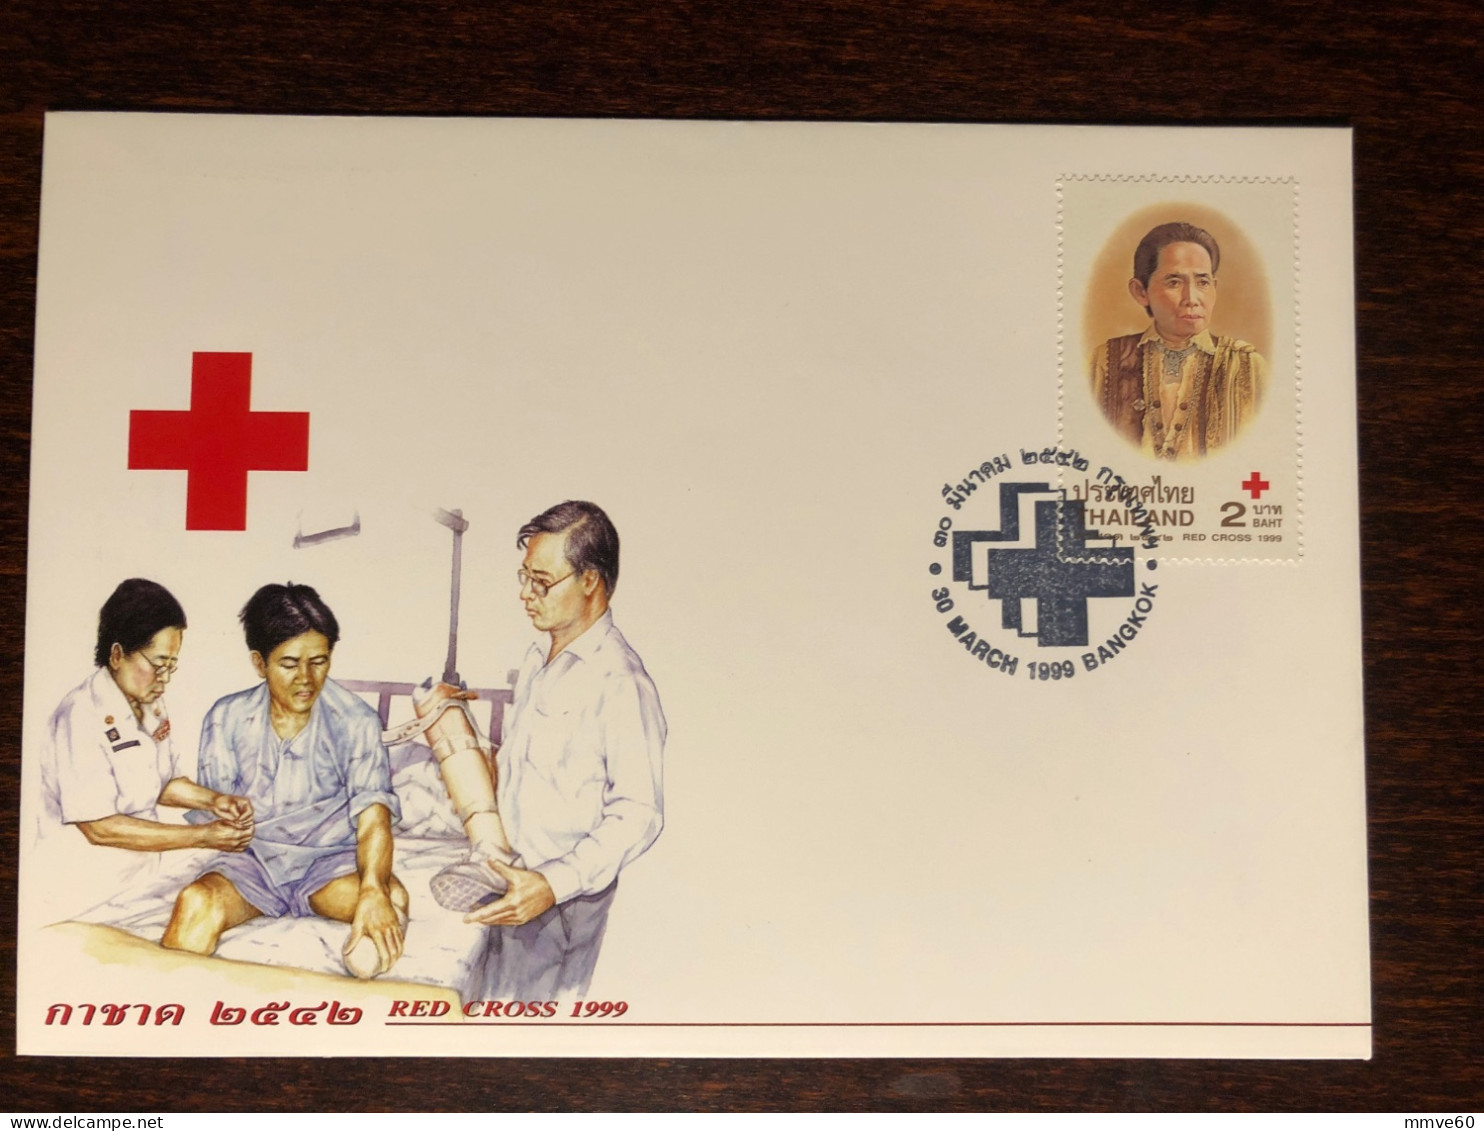 THAILAND FDC COVER 1999 YEAR RED CROSS HEALTH MEDICINE STAMPS - Thailand